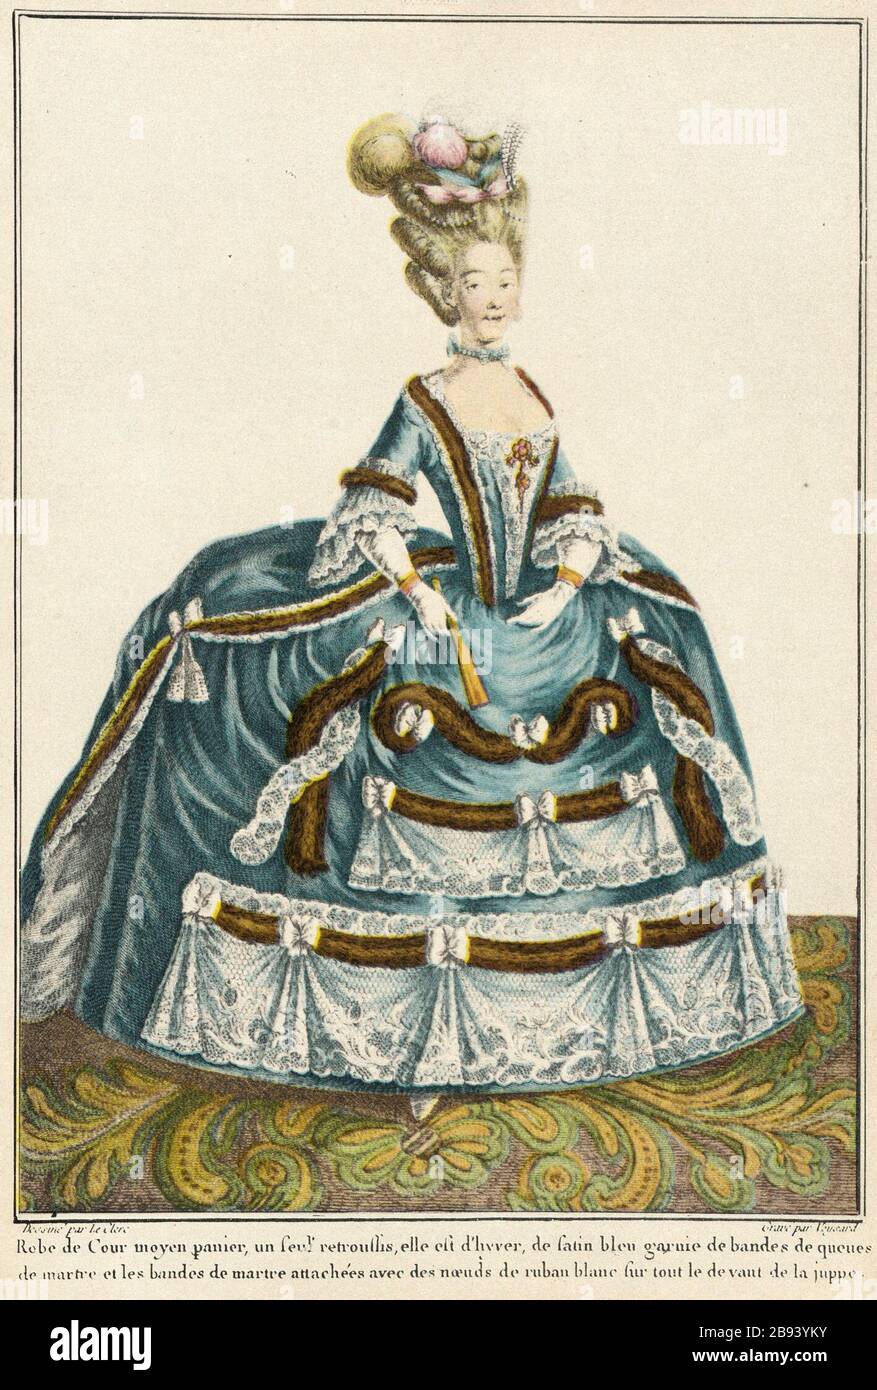 Robe de Cour; English: Court robe with fur (fur ribbons from marten)  France, Paris, 19th century; reproduced 20th century Prints; engravings  Color photograph of engraving on paper Composition: 7 5/16 x 4